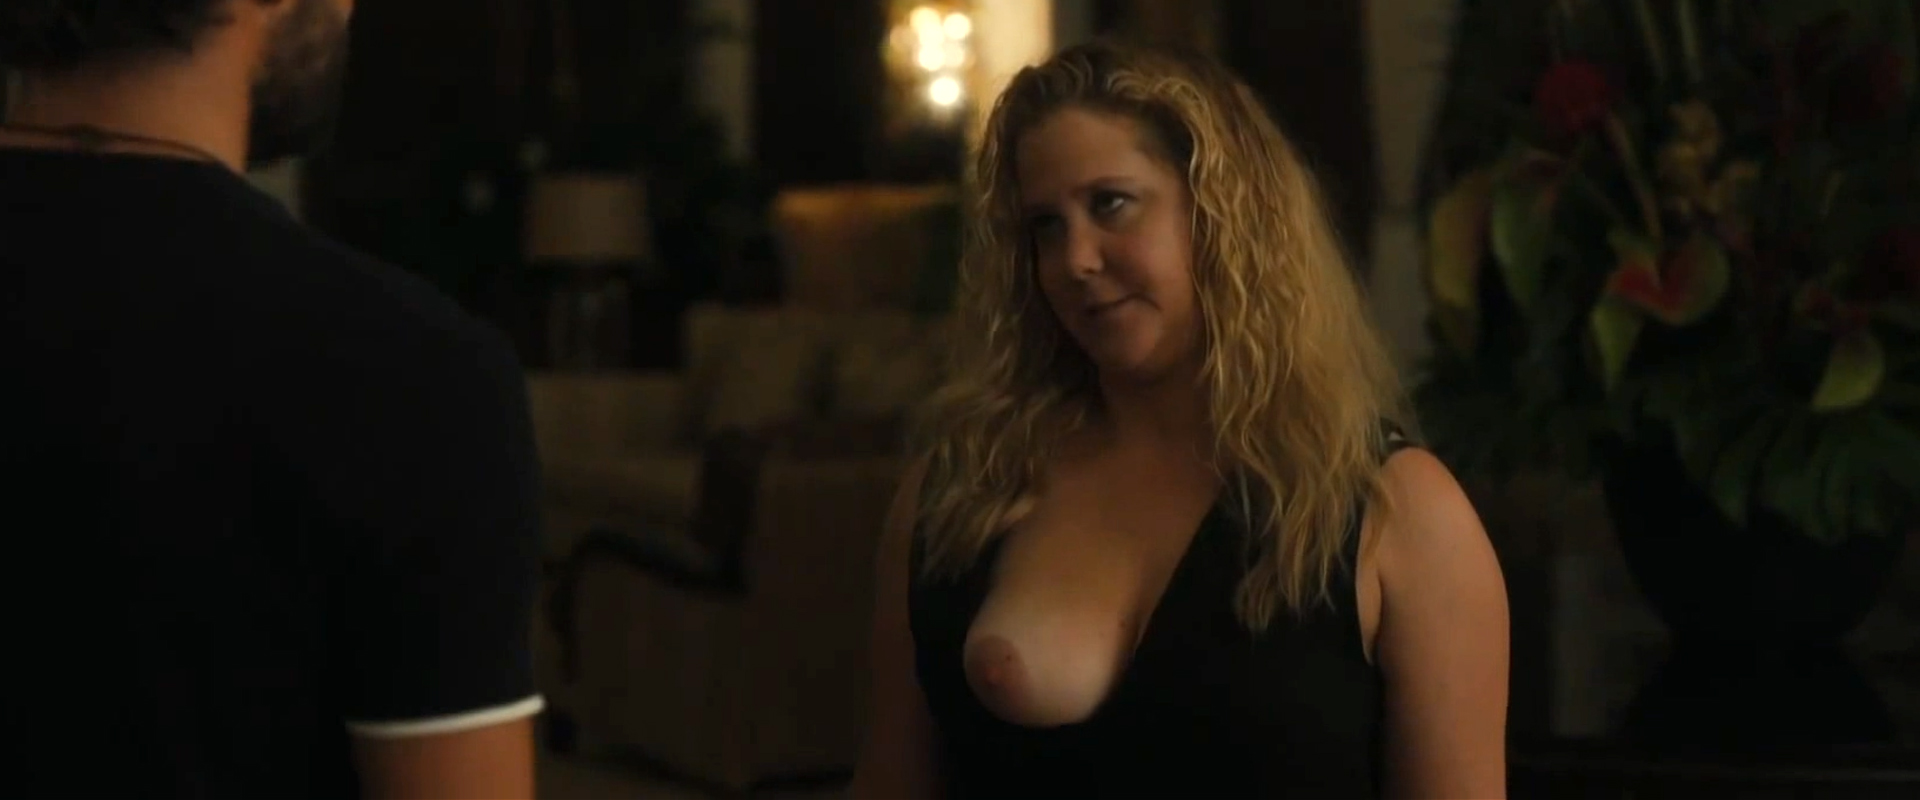 Nudity snatched schumer amy Review: Amy